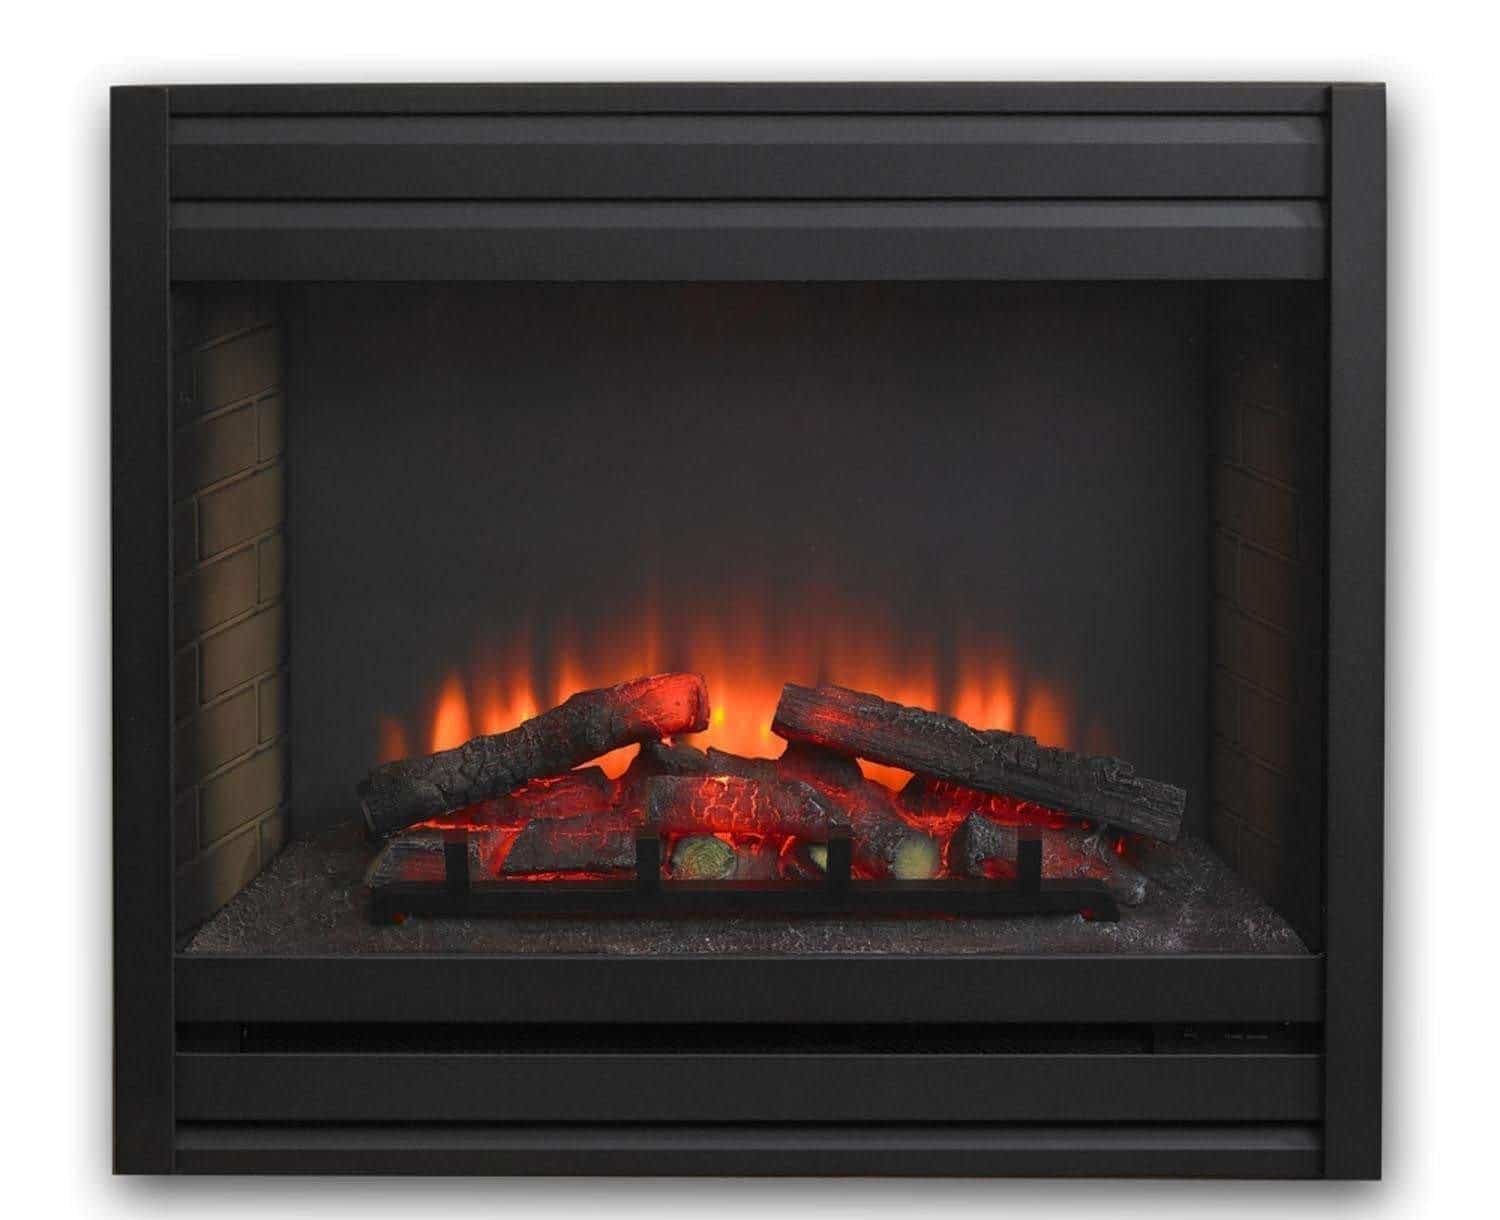 GreatCo Gallery Series Insert Electric Fireplace